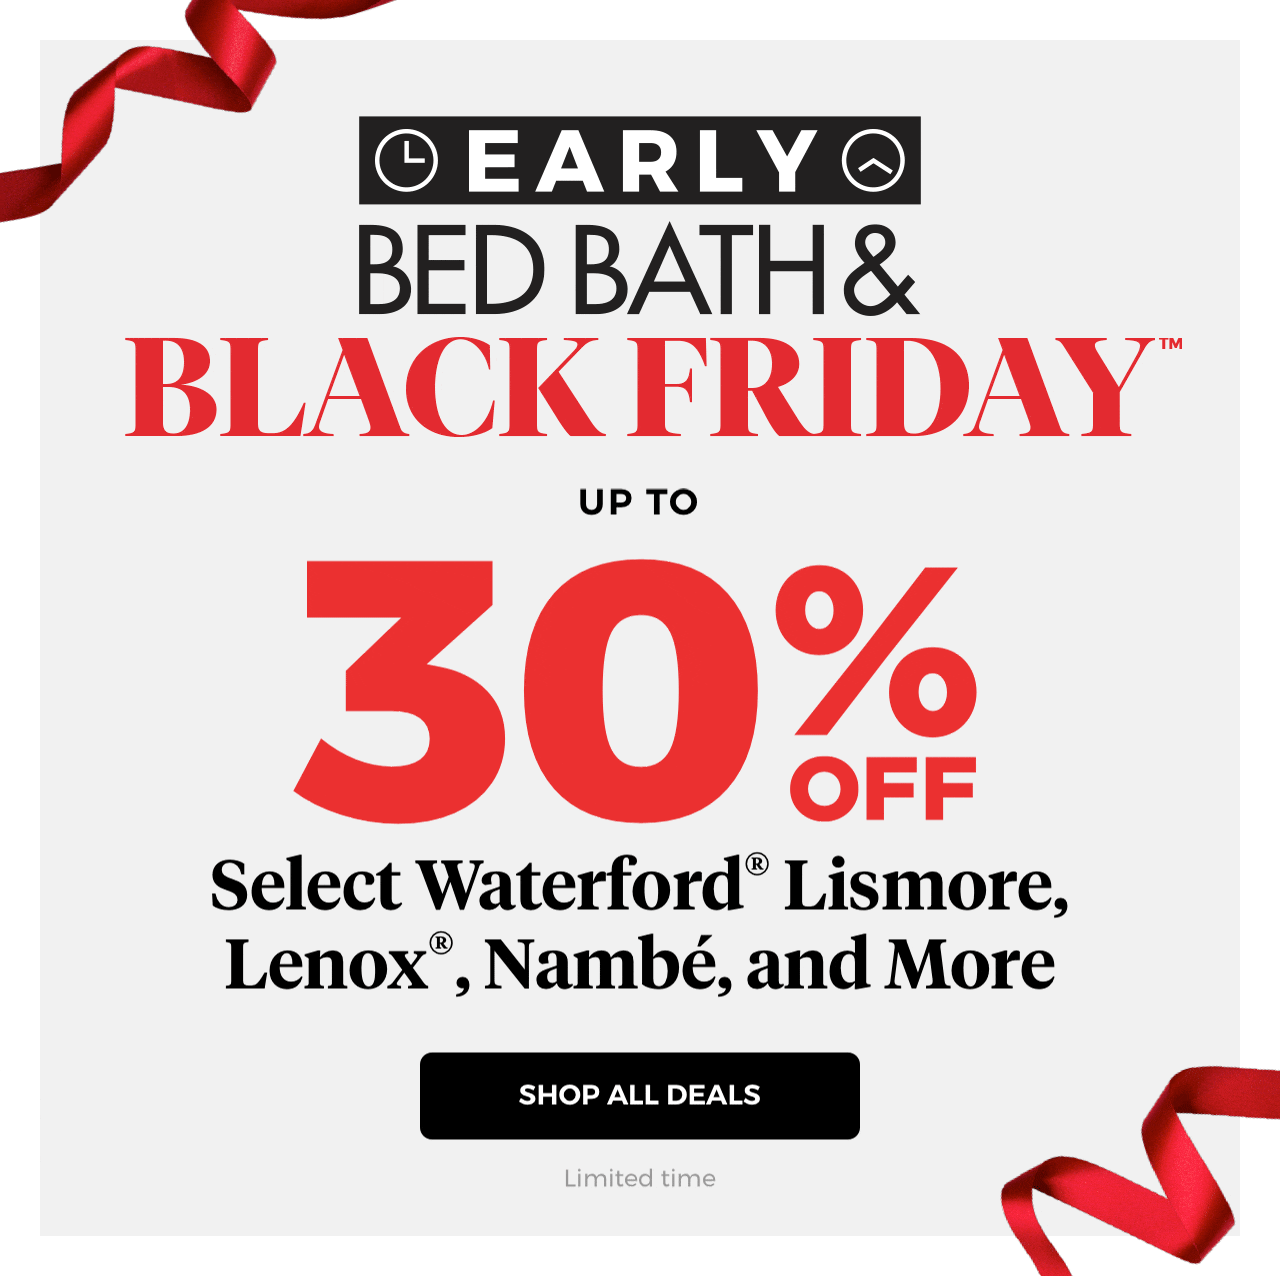 Bed Bath & Beyond Up to 30 OFF NOW for Early Black Friday! Plus, a